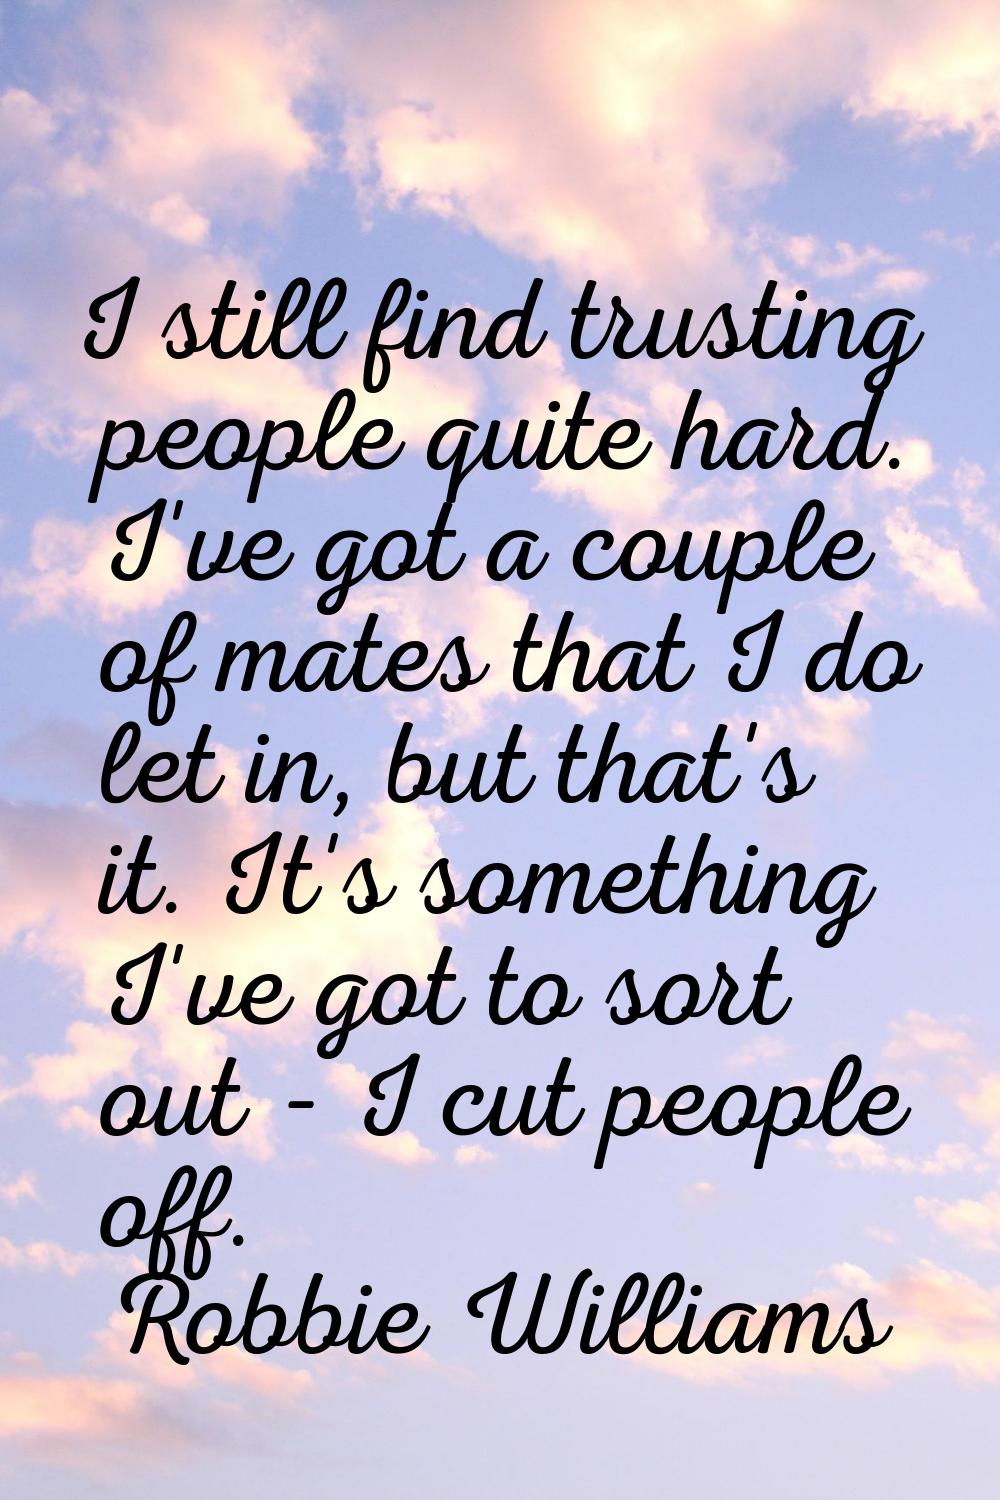 I still find trusting people quite hard. I've got a couple of mates that I do let in, but that's it